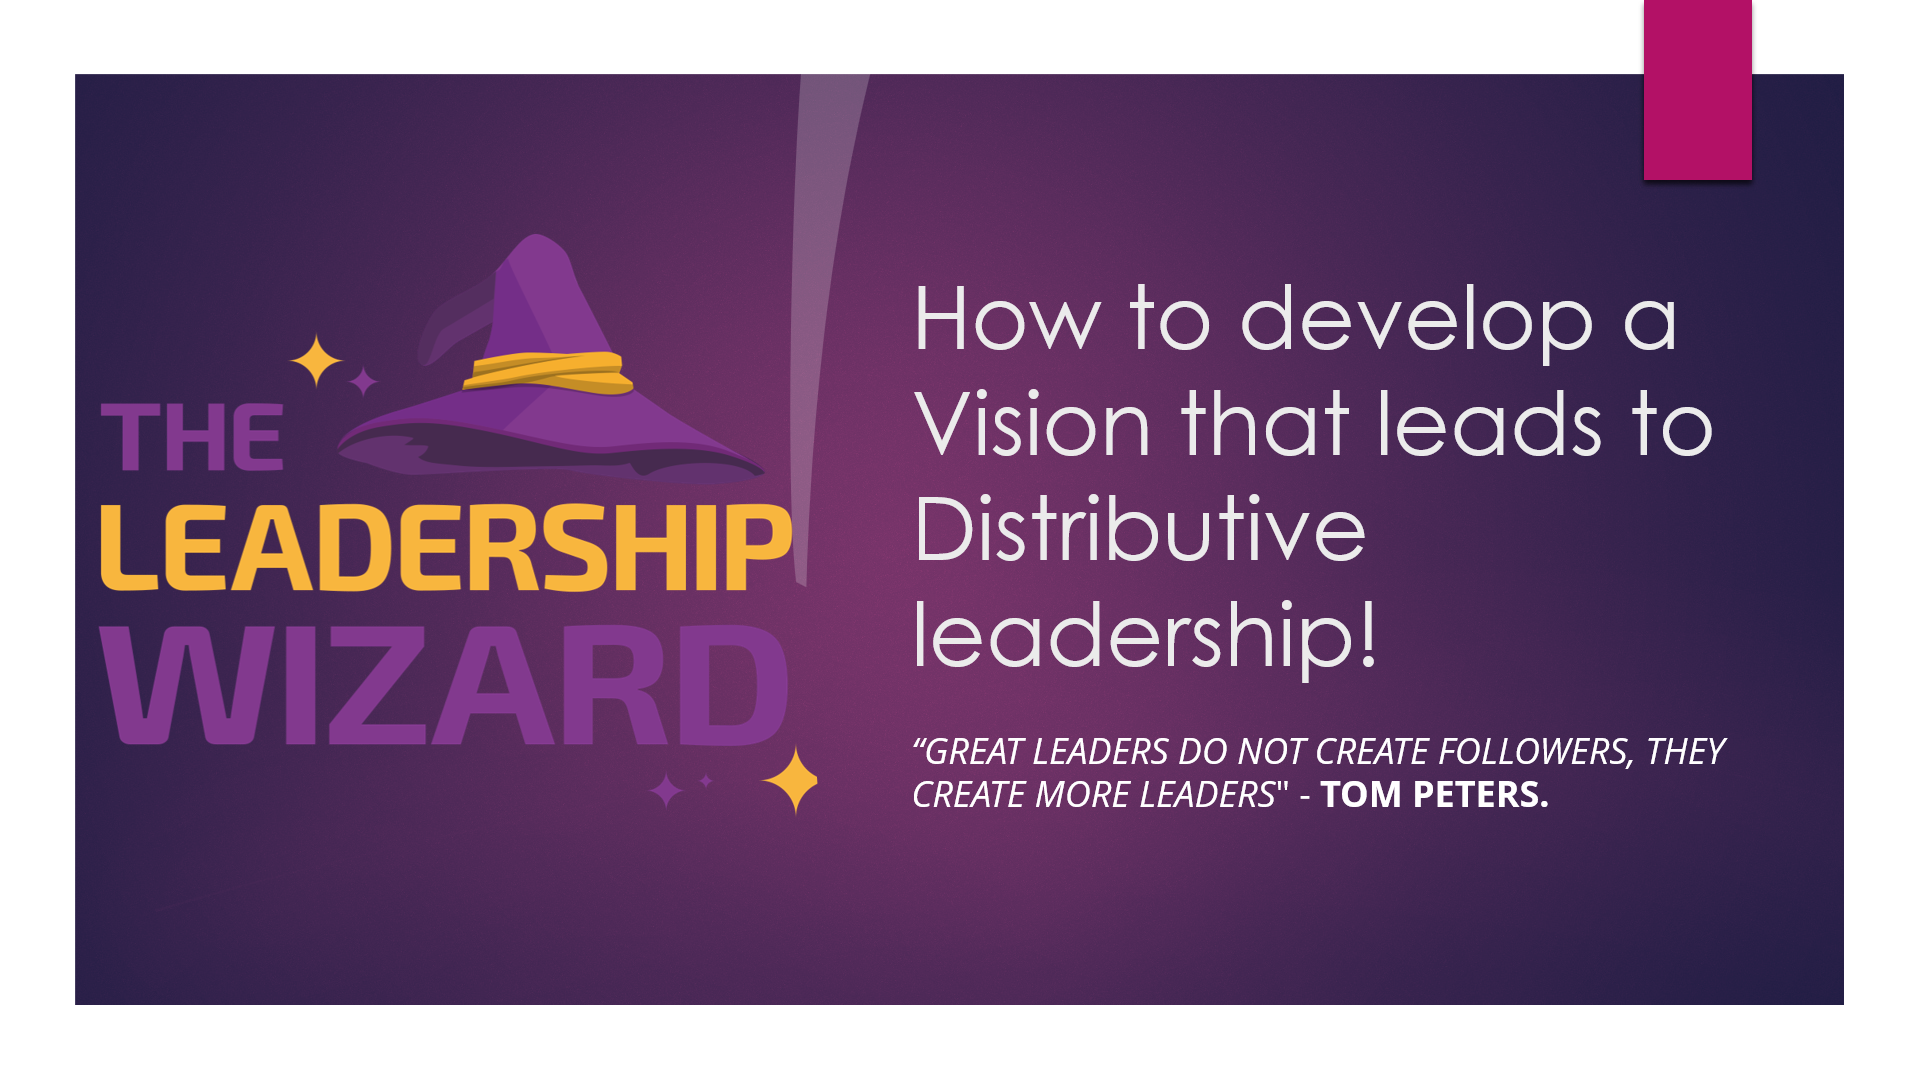 How to Develop a Vision that leads to Distributive Leadership!